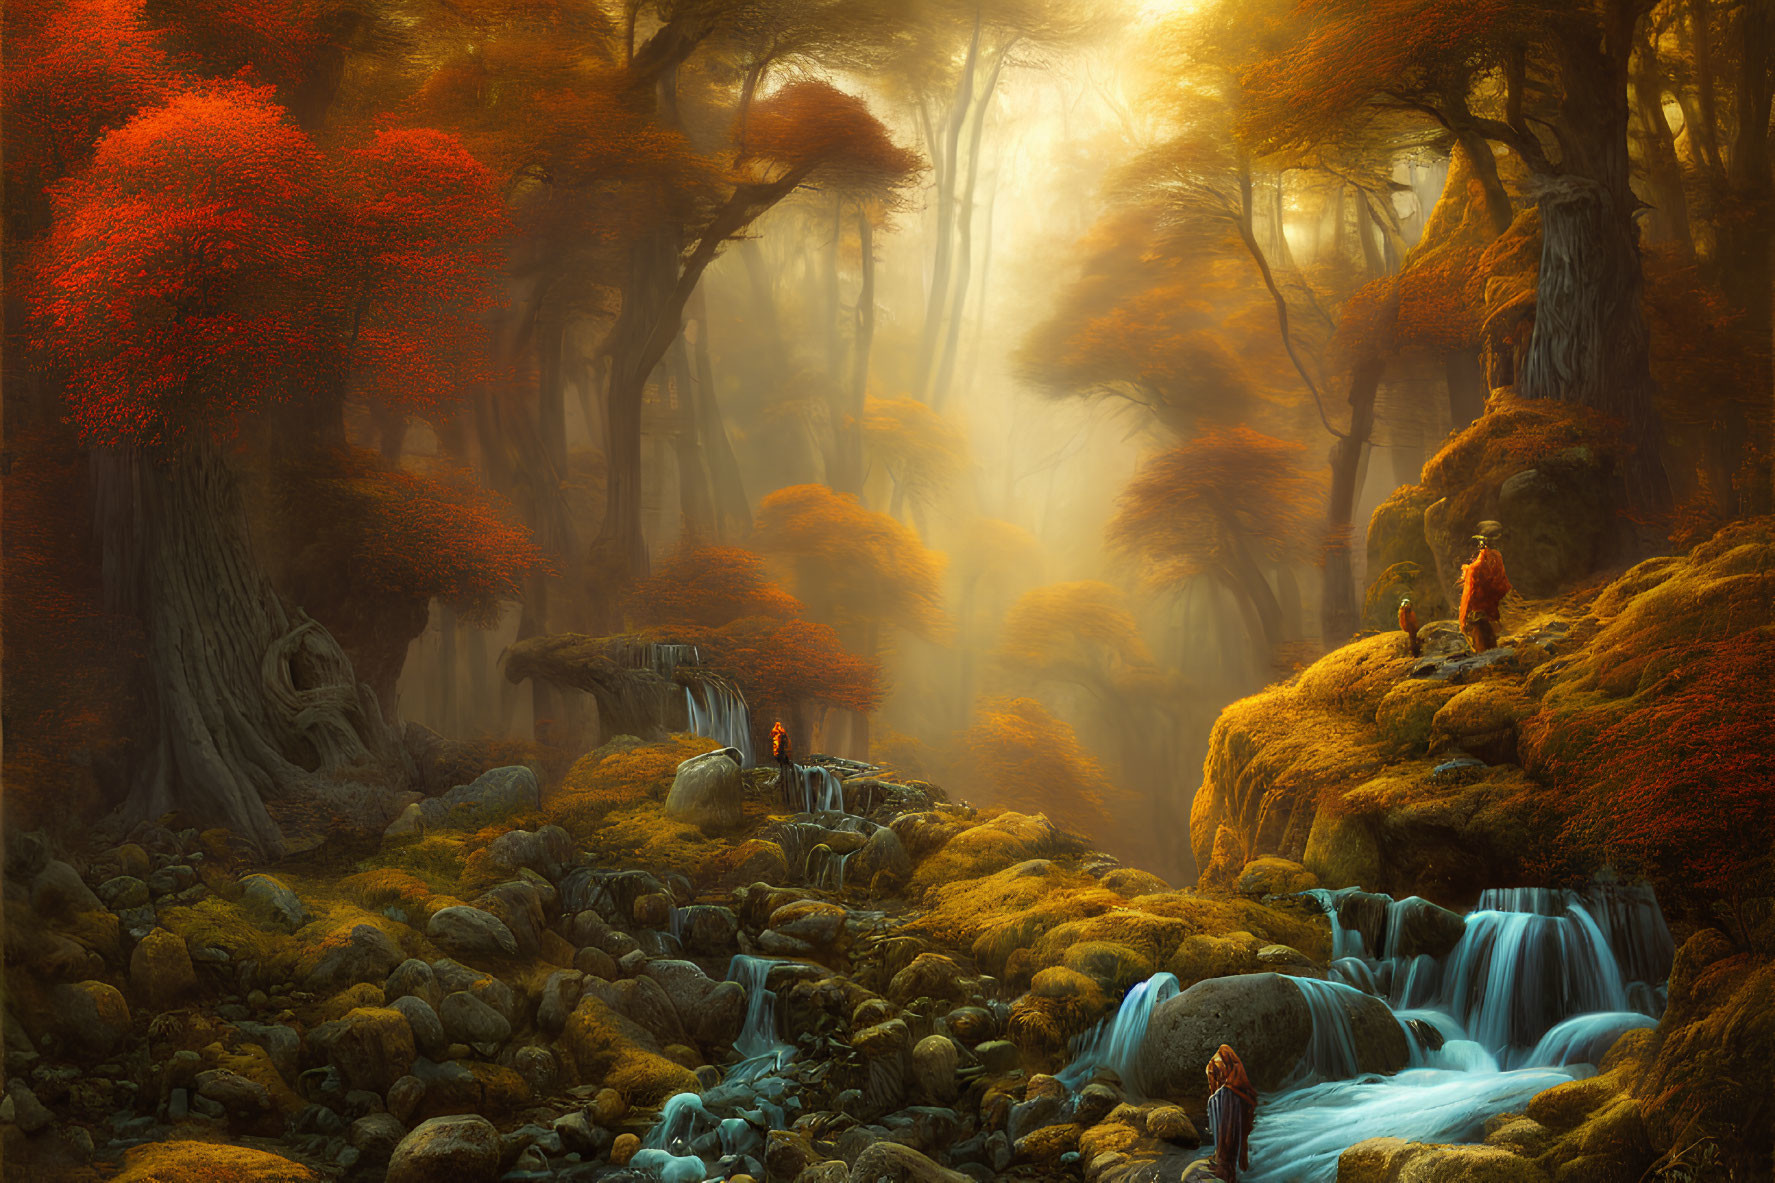 Ethereal autumn forest with red foliage and person by stream in golden light